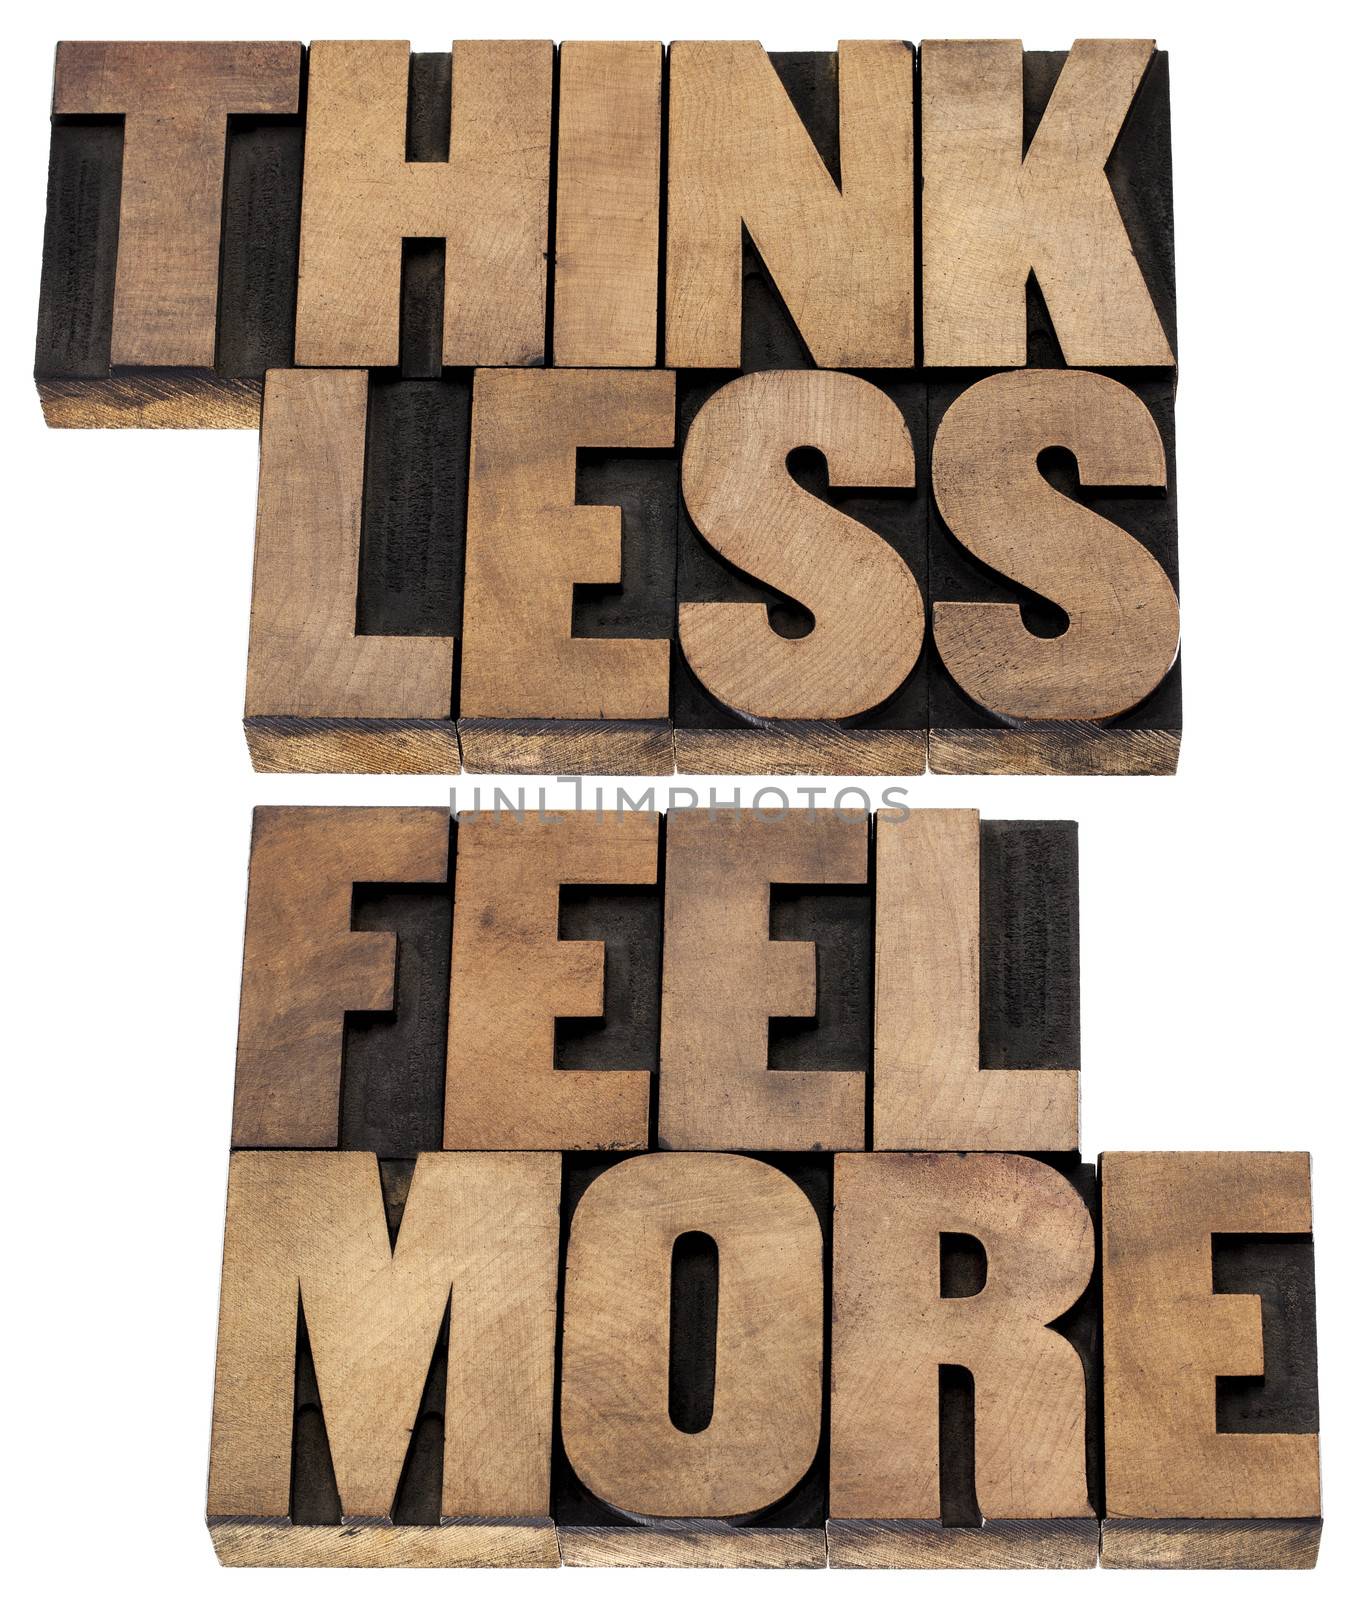 think less, feel more by PixelsAway